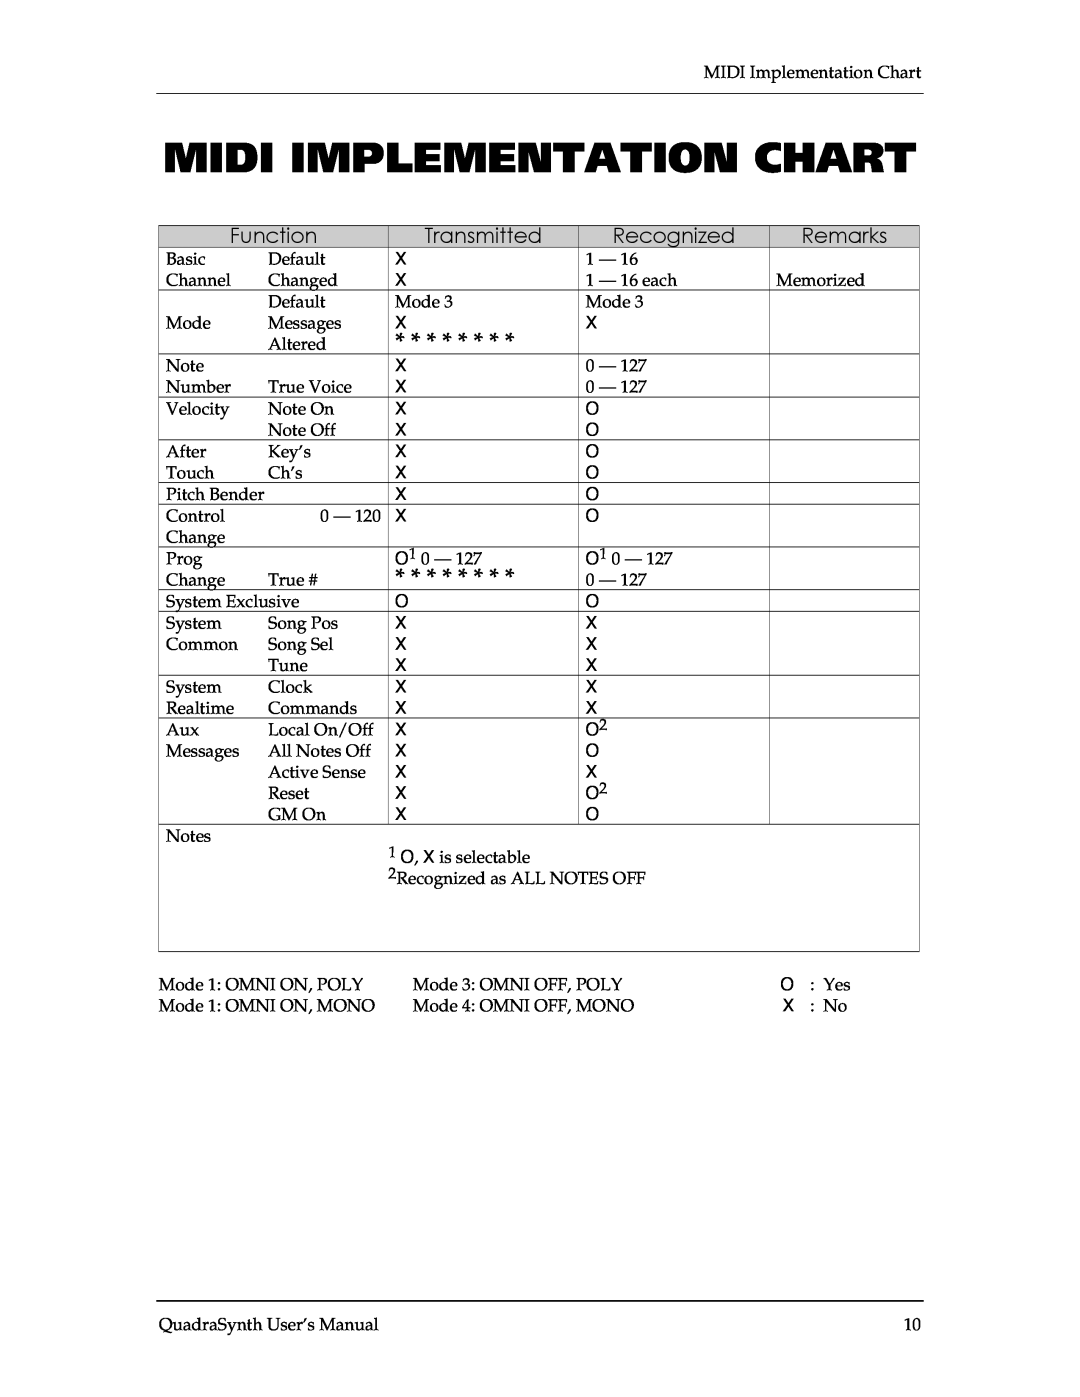 Alesis QSR 64 manual Midi Implementation Chart, Function, Transmitted, Recognized, Remarks 